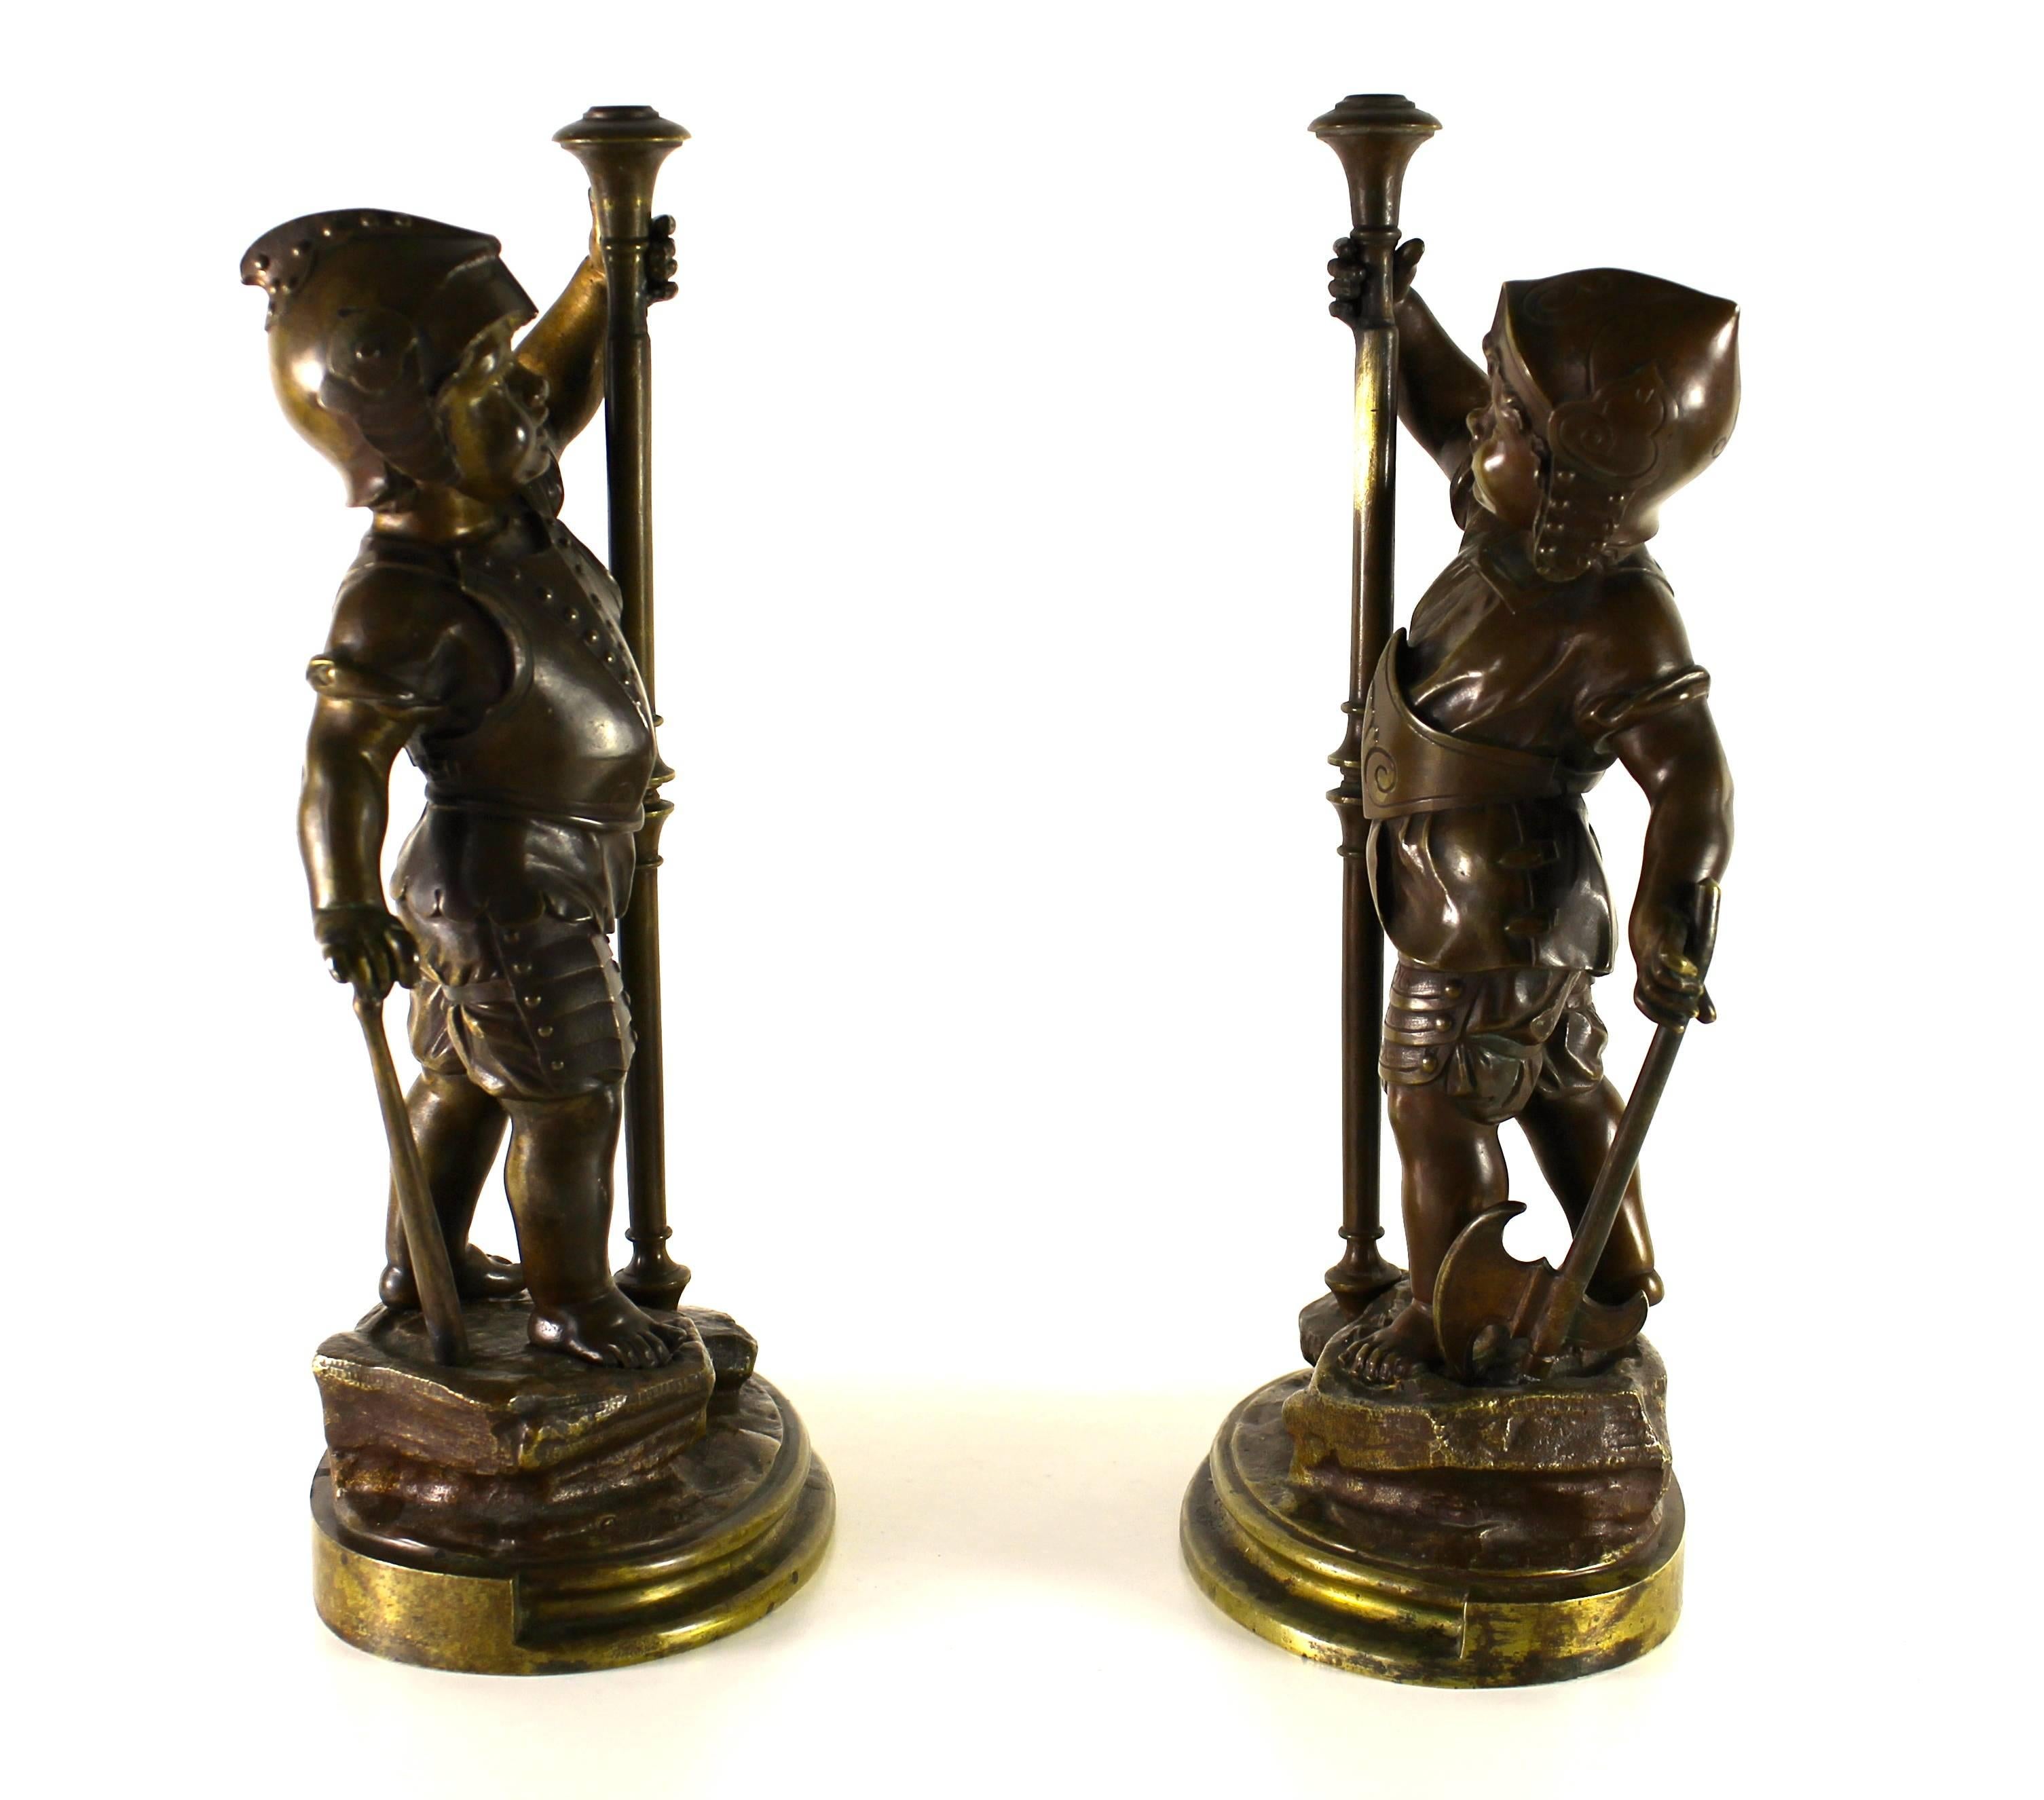 Hand-Crafted Pair of Warrior Putti in Bronze, 19th Century For Sale